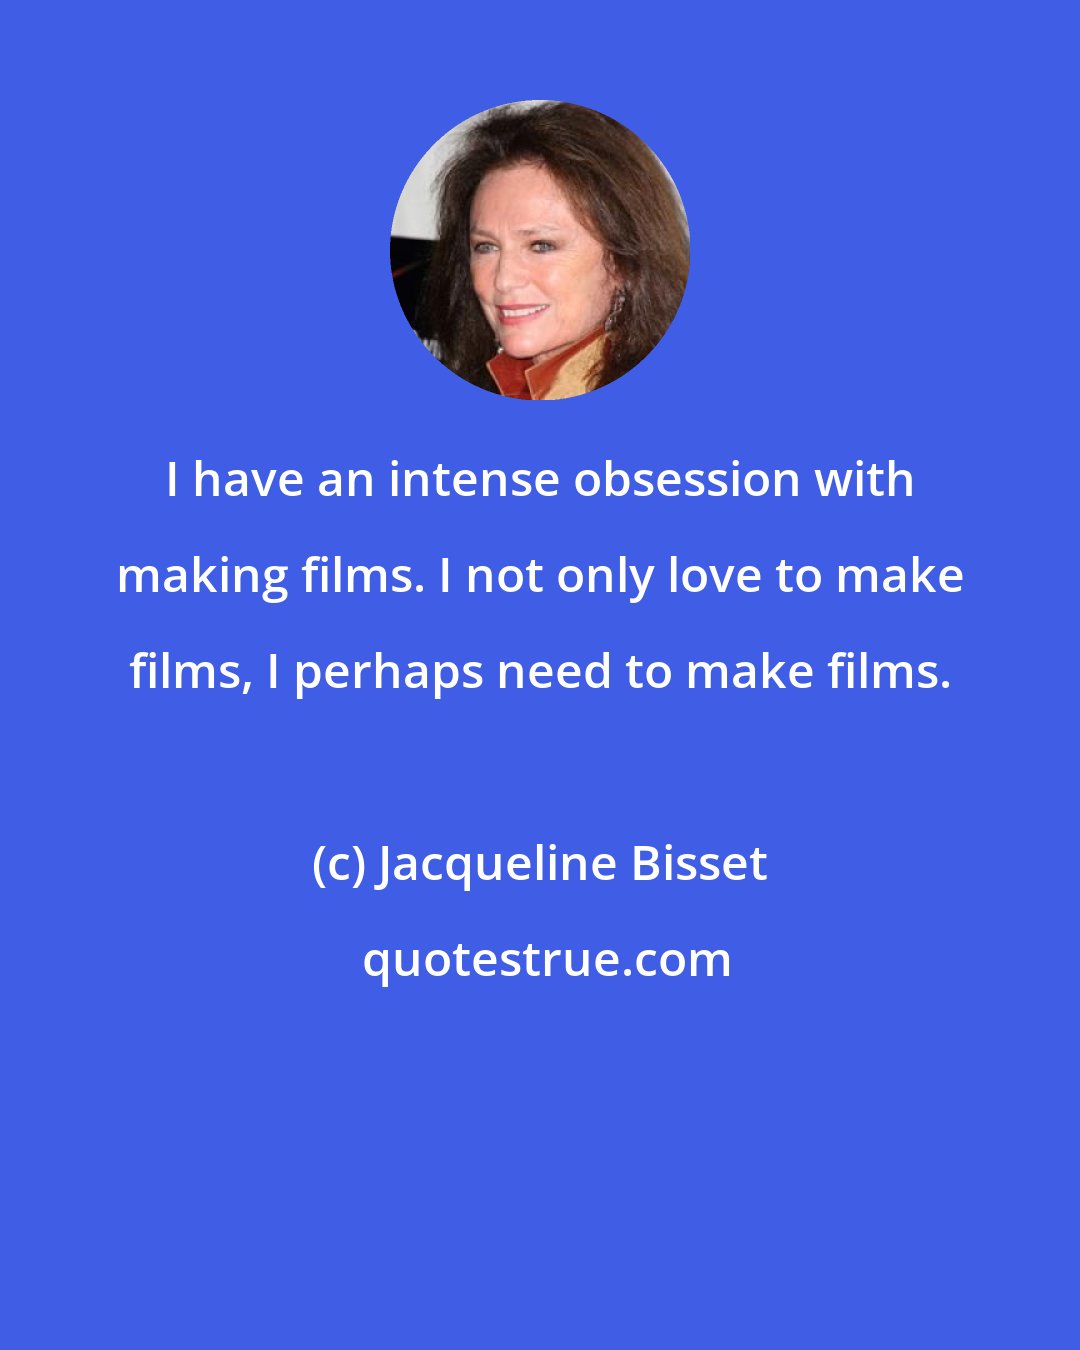 Jacqueline Bisset: I have an intense obsession with making films. I not only love to make films, I perhaps need to make films.